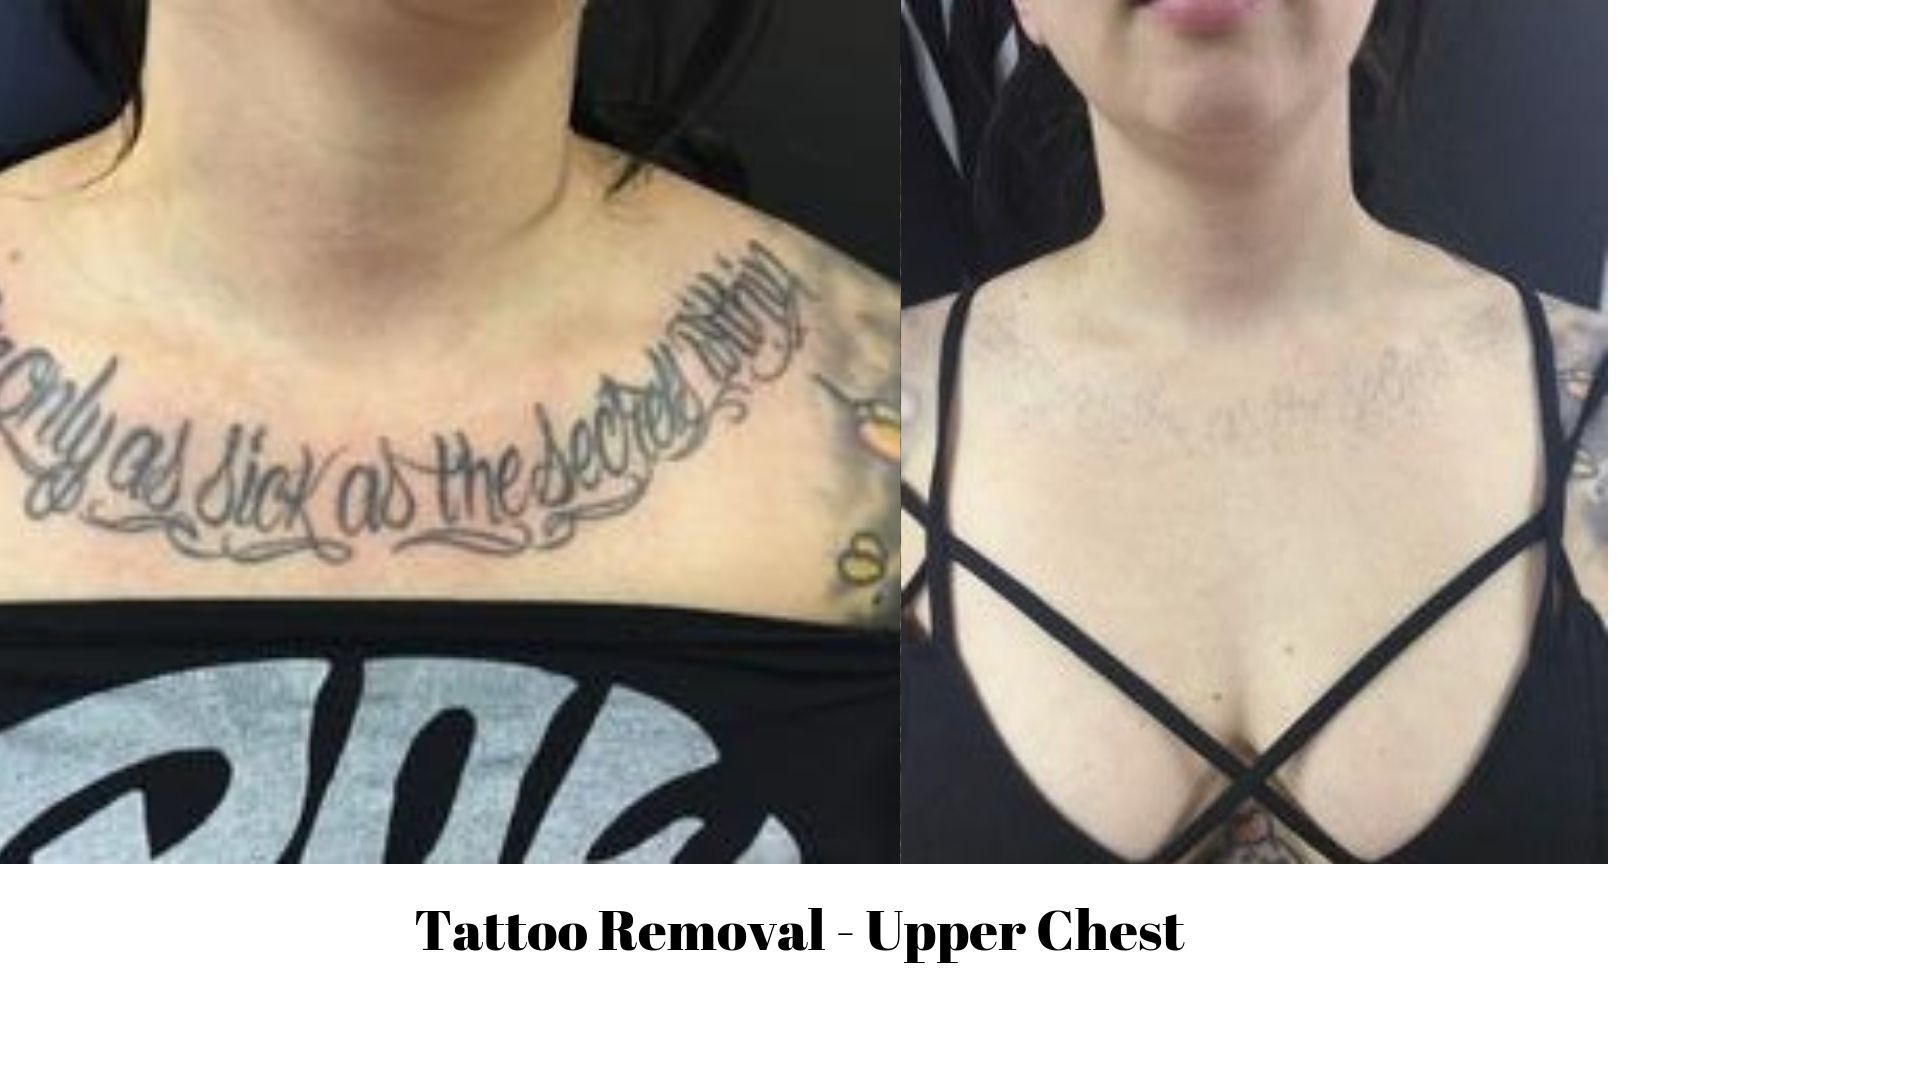 How Much Does It Cost to Remove a Tattoo?